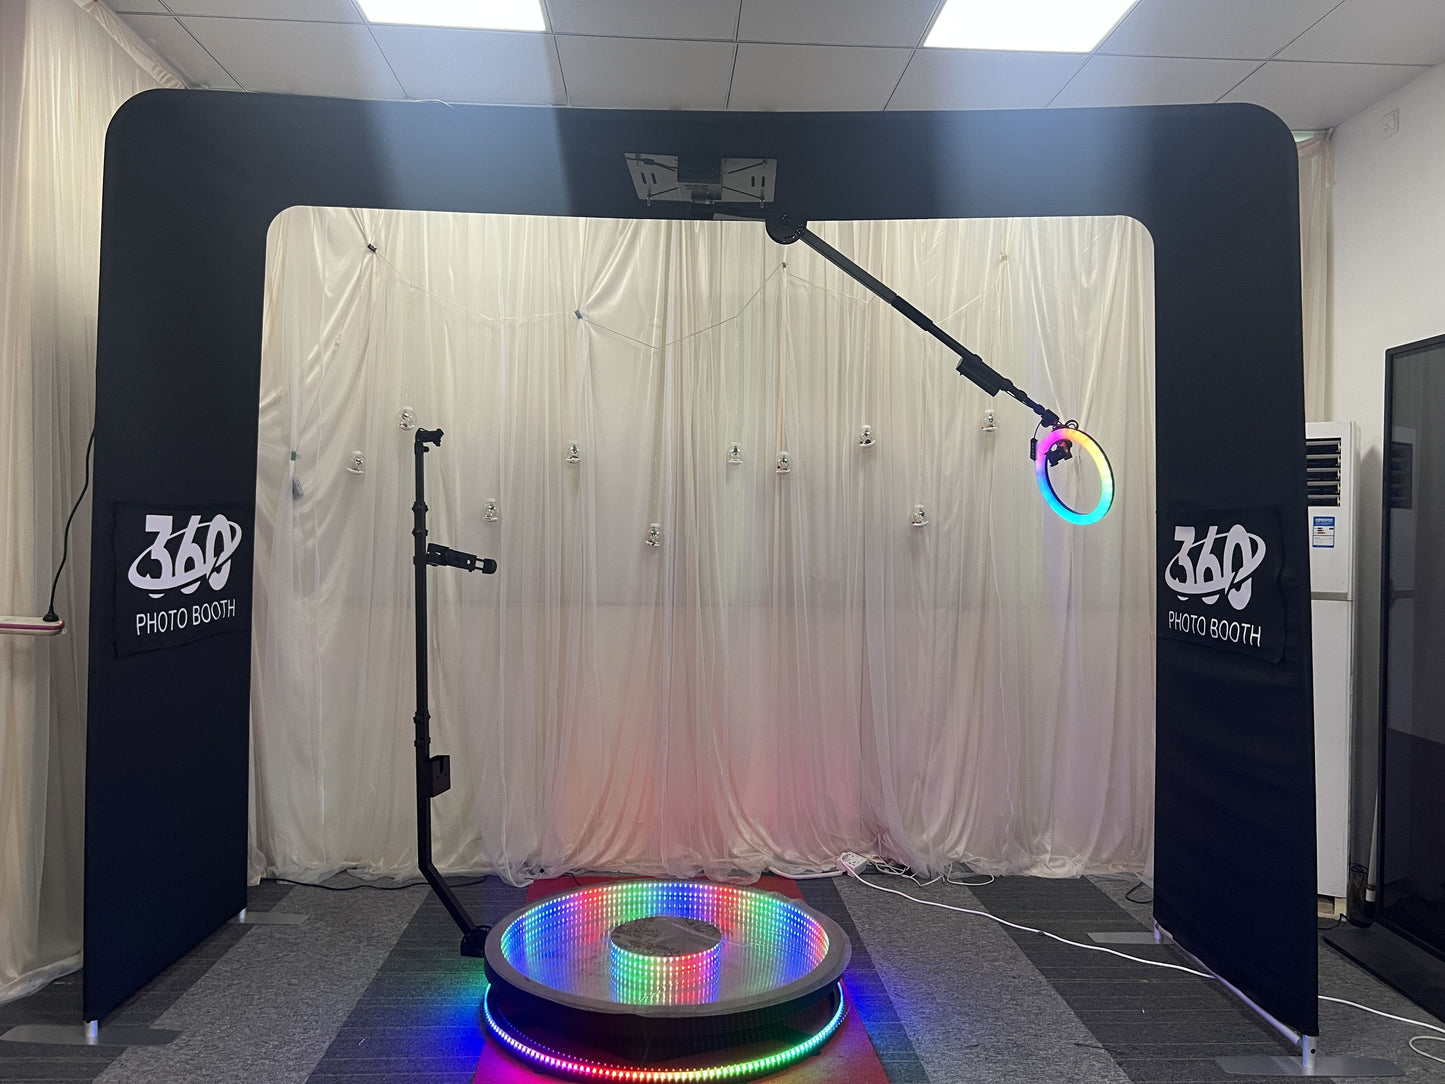 Portable Overhead 360 Photo Booth for Wedding Party Events Sky 360 Selfie Booth Top Automatic Spin with remote